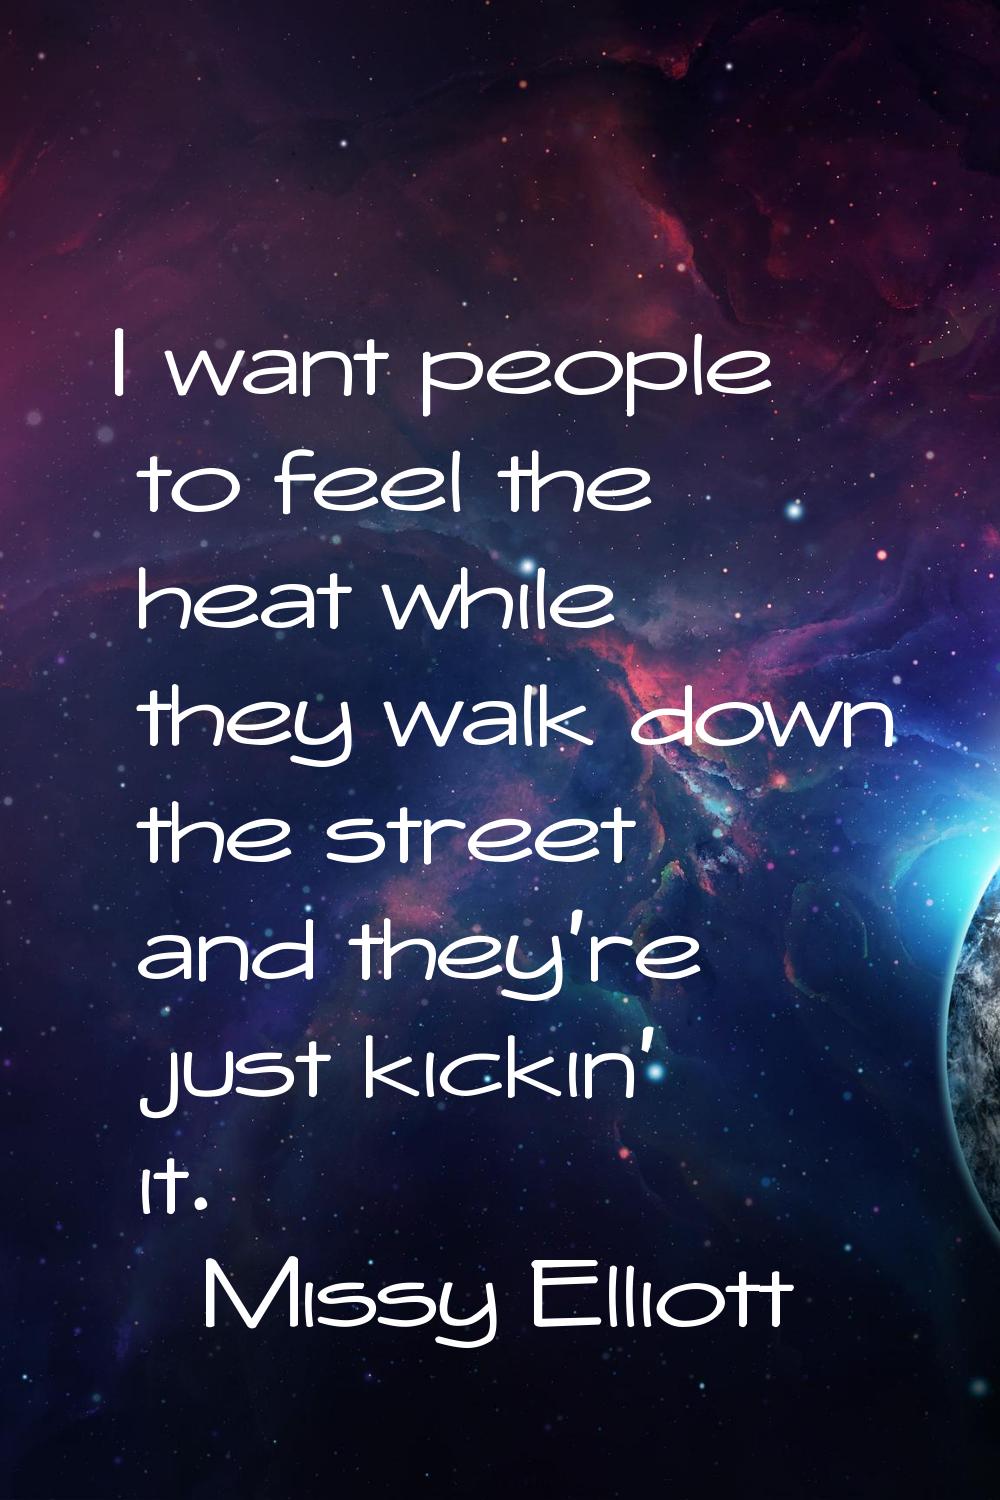 I want people to feel the heat while they walk down the street and they're just kickin' it.